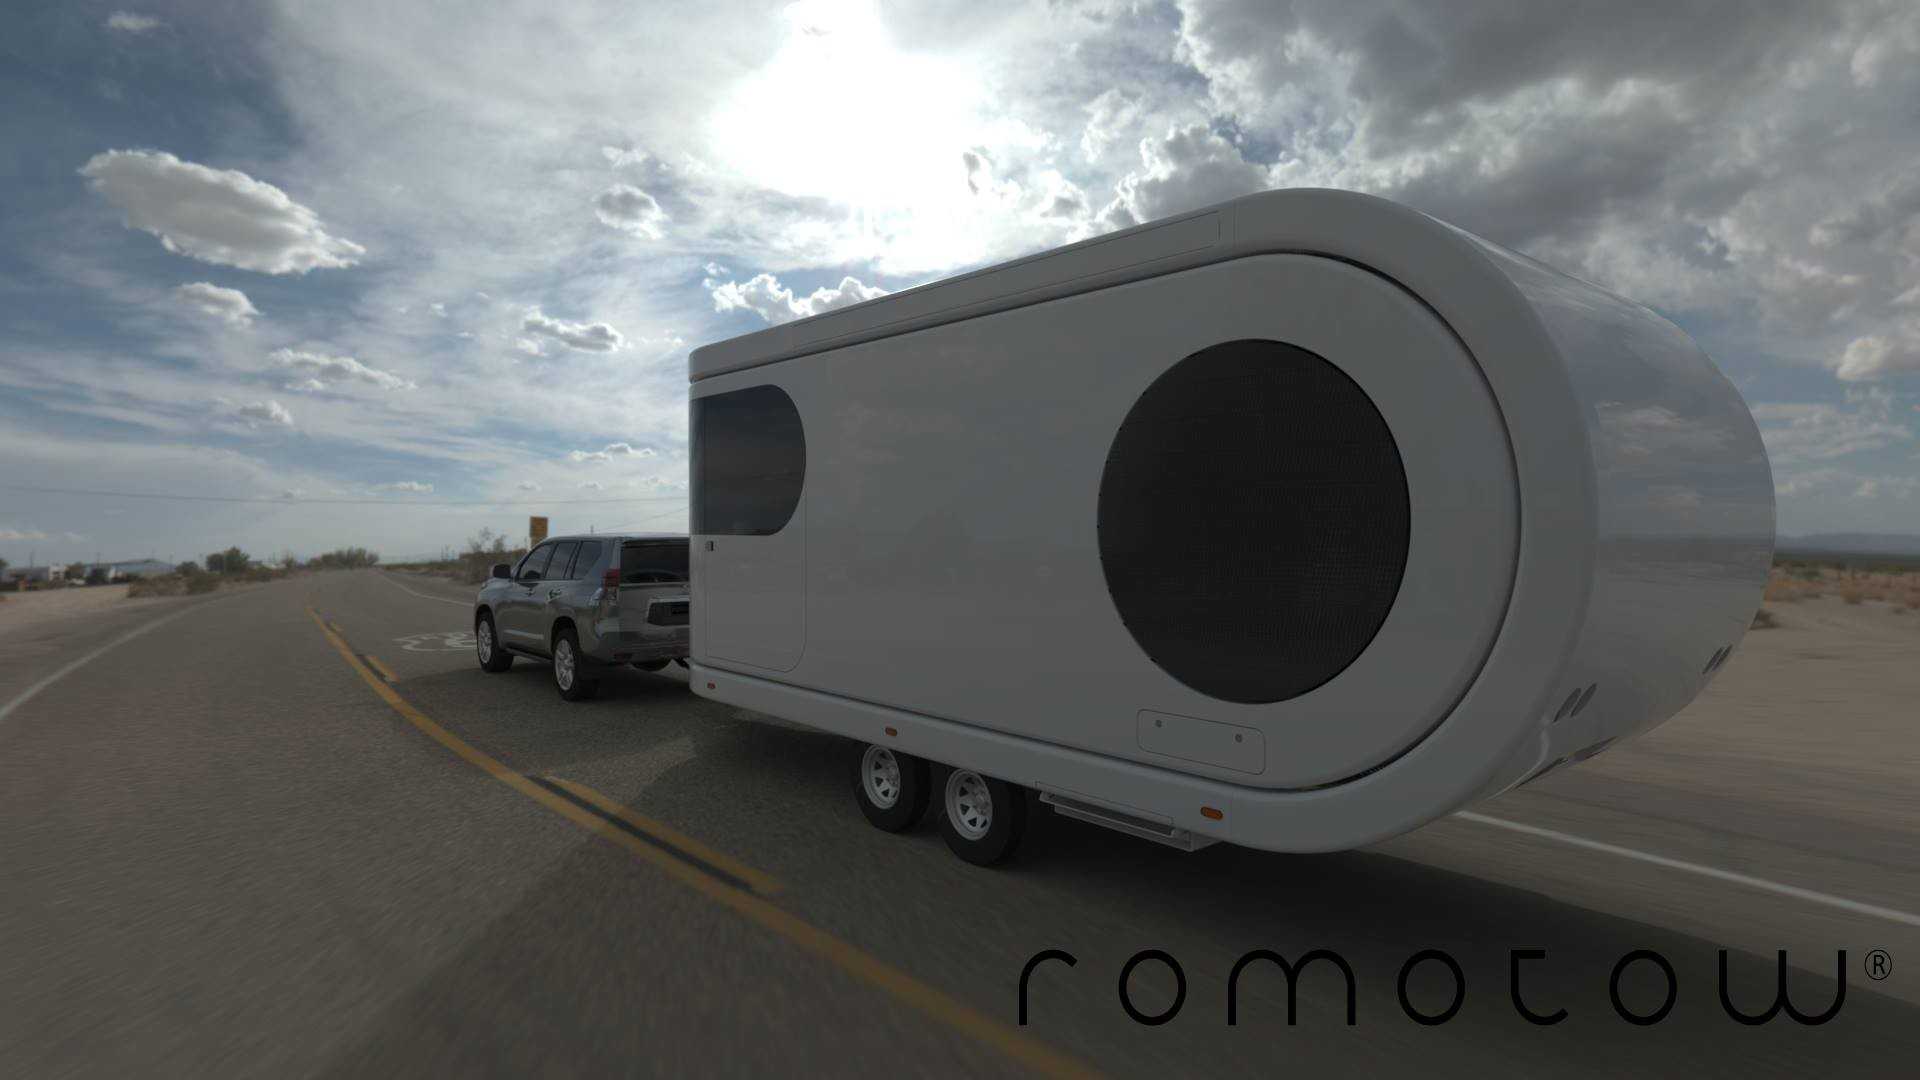 https://s1.cdn.autoevolution.com/images/news/gallery/romotow-trailer-camper-has-in-built-patio-for-the-ultimate-chill-experience_7.jpg